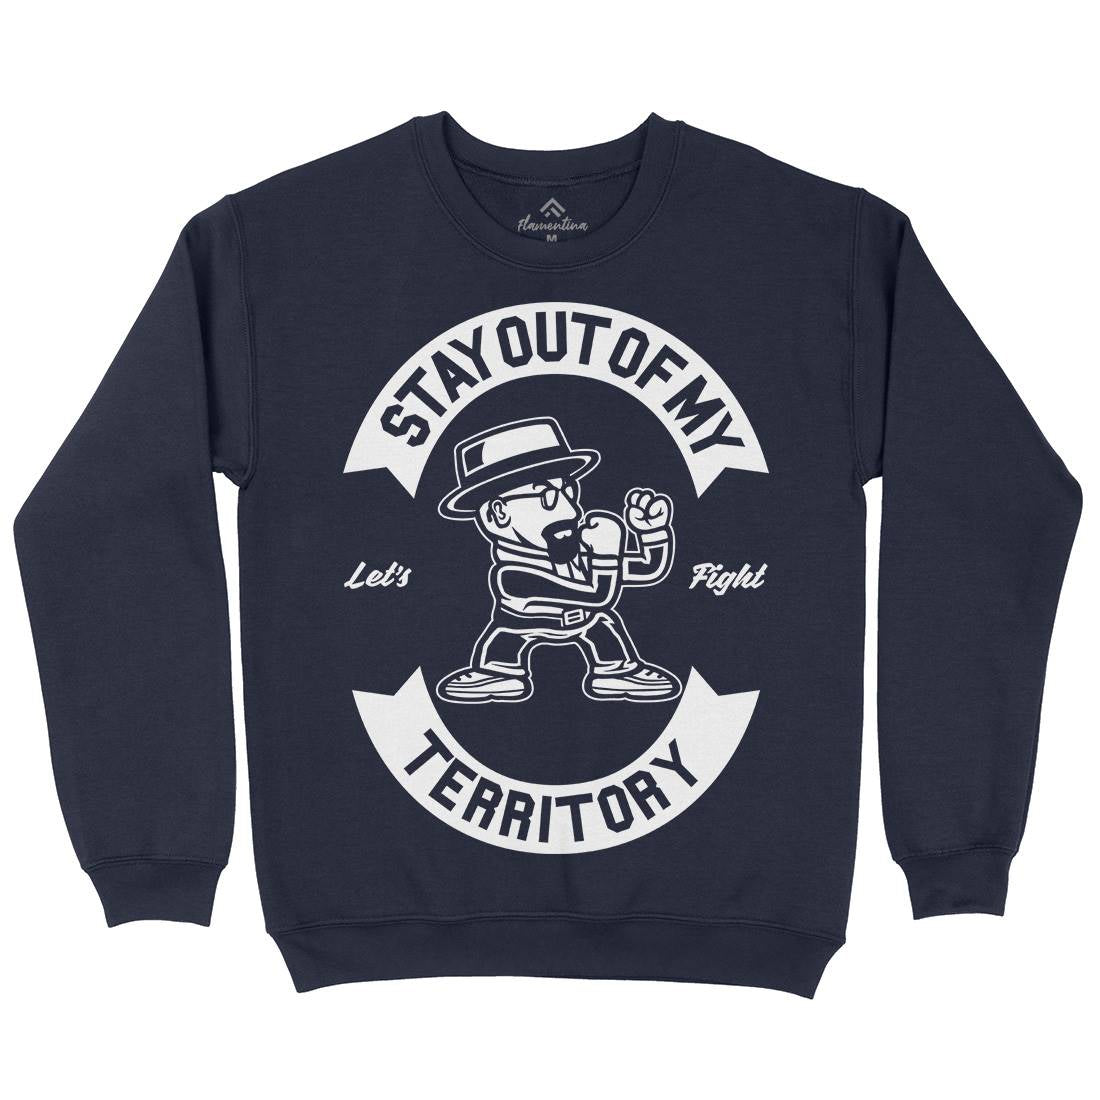 Stay Out Kids Crew Neck Sweatshirt Retro A284